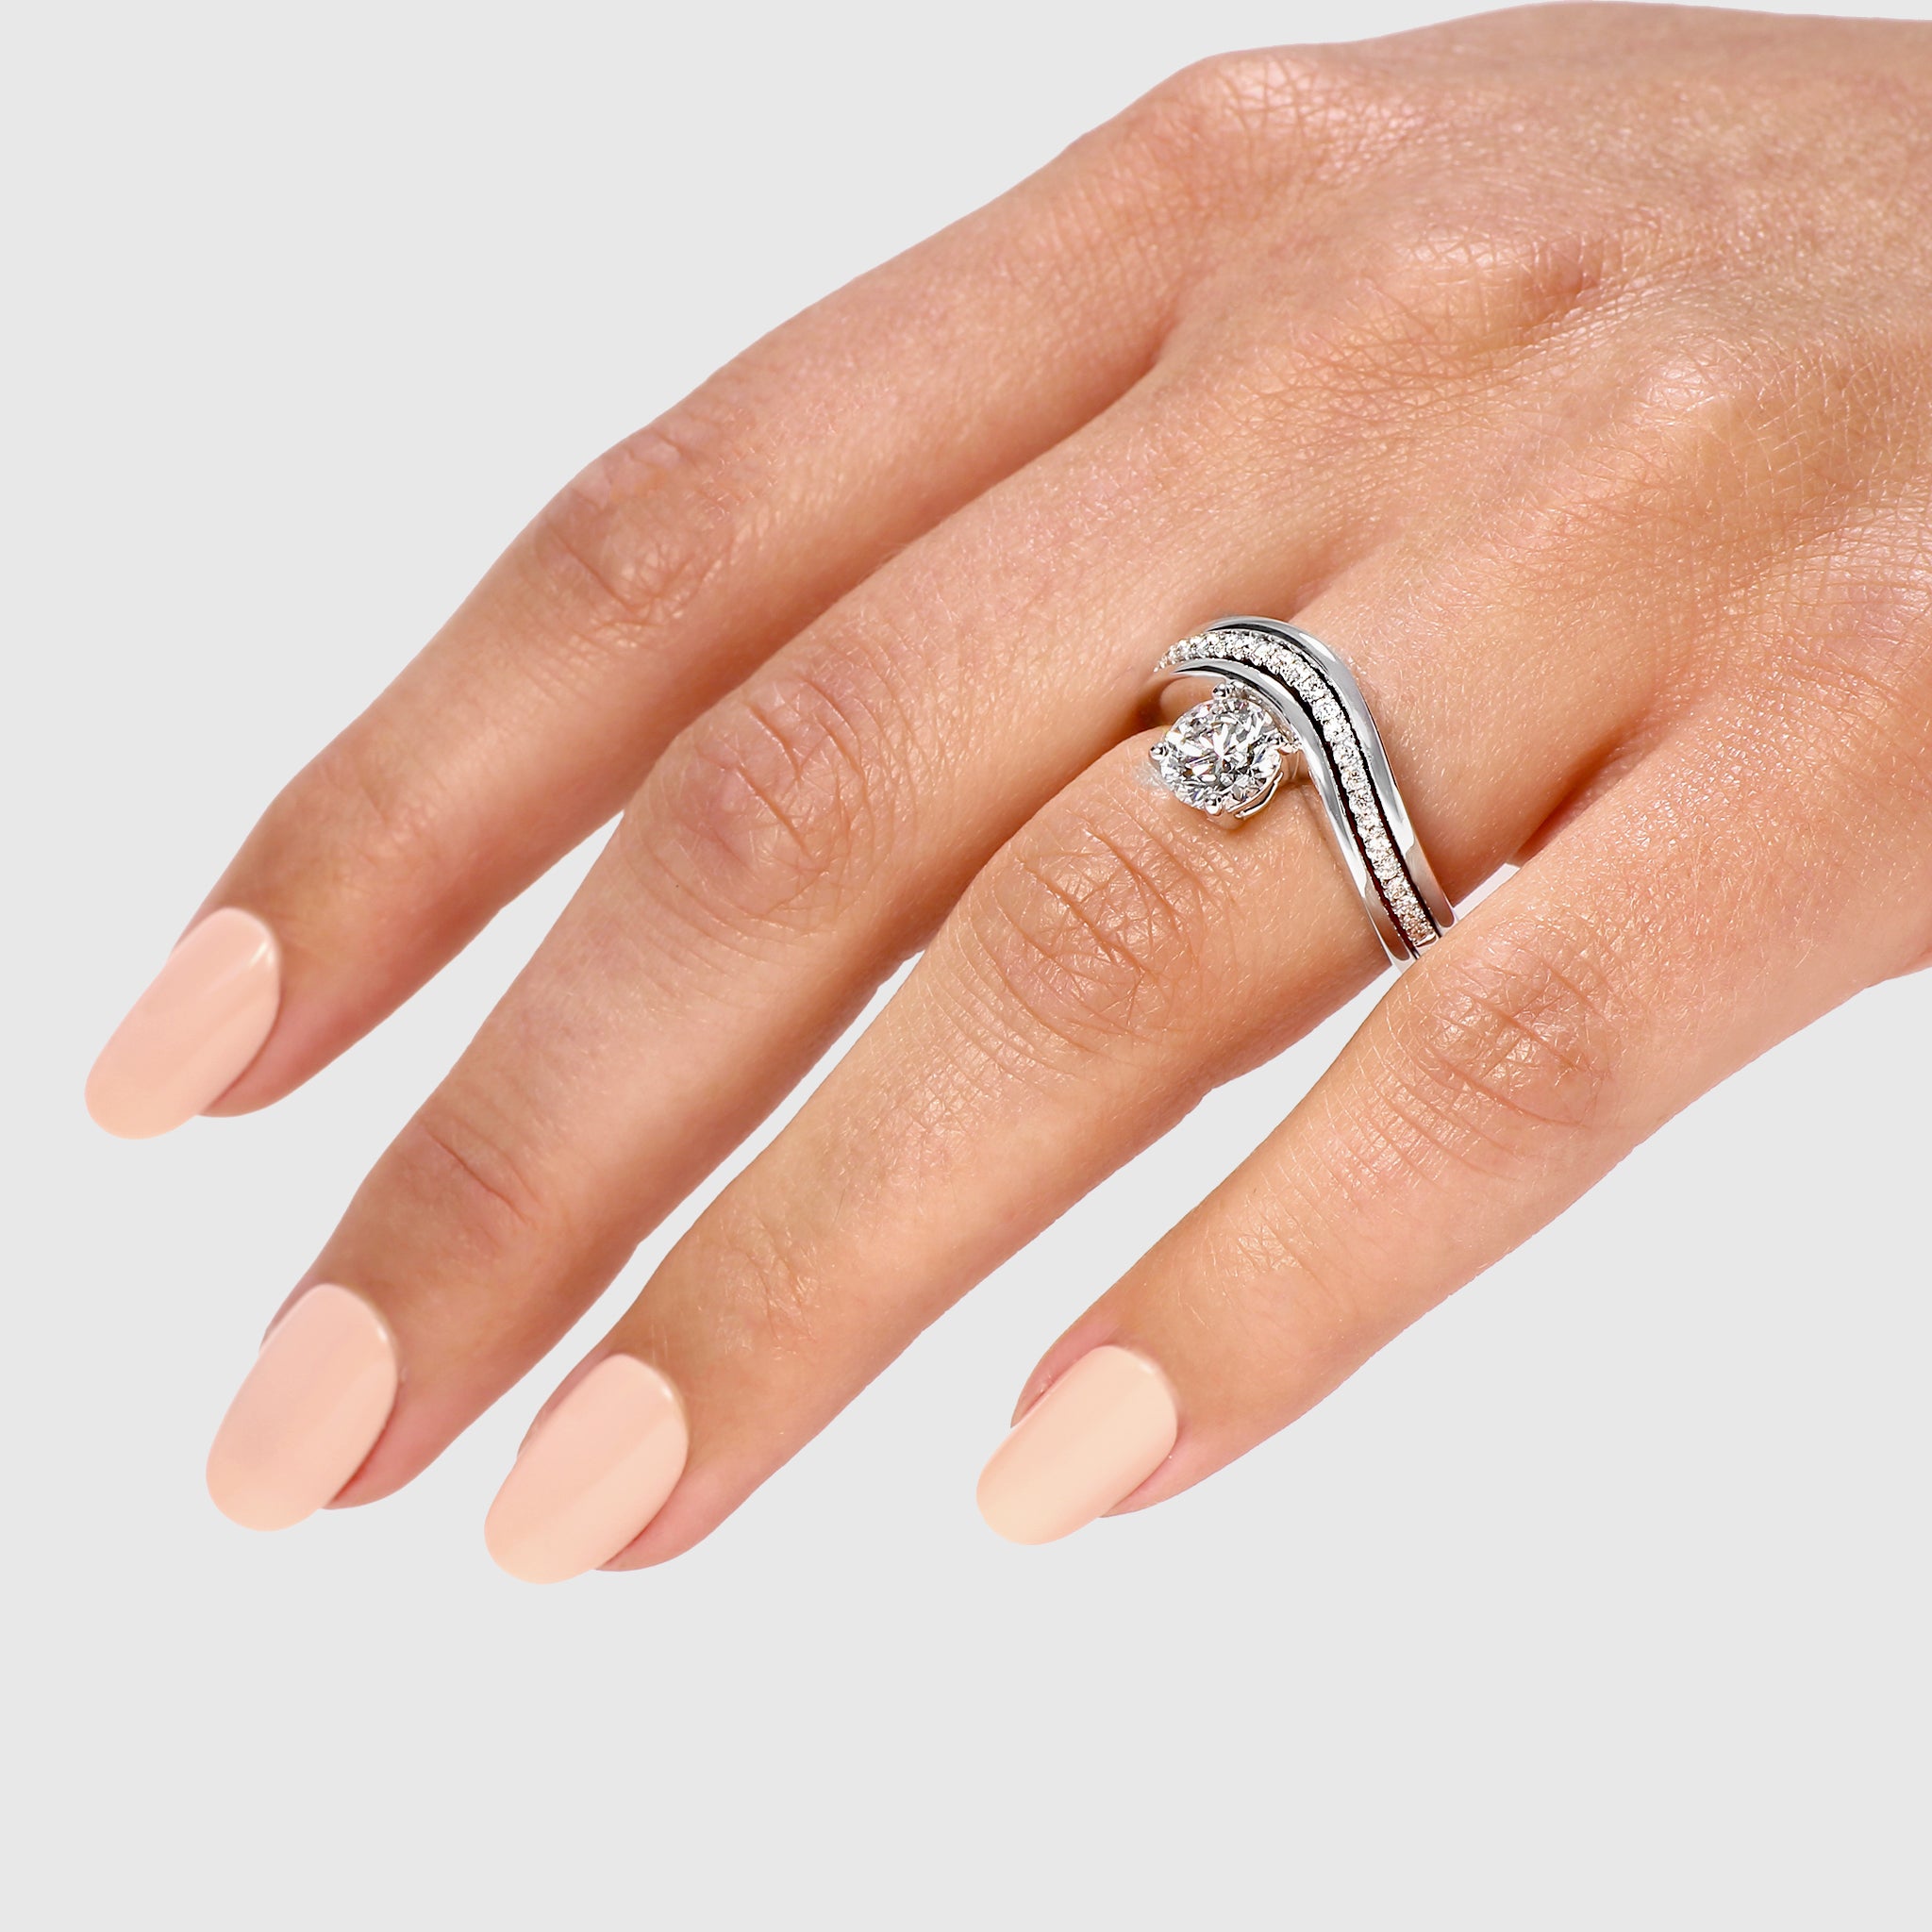 Shimansky - Women Wearing the Silhouette Wedding Band crafted in 18K White Gold